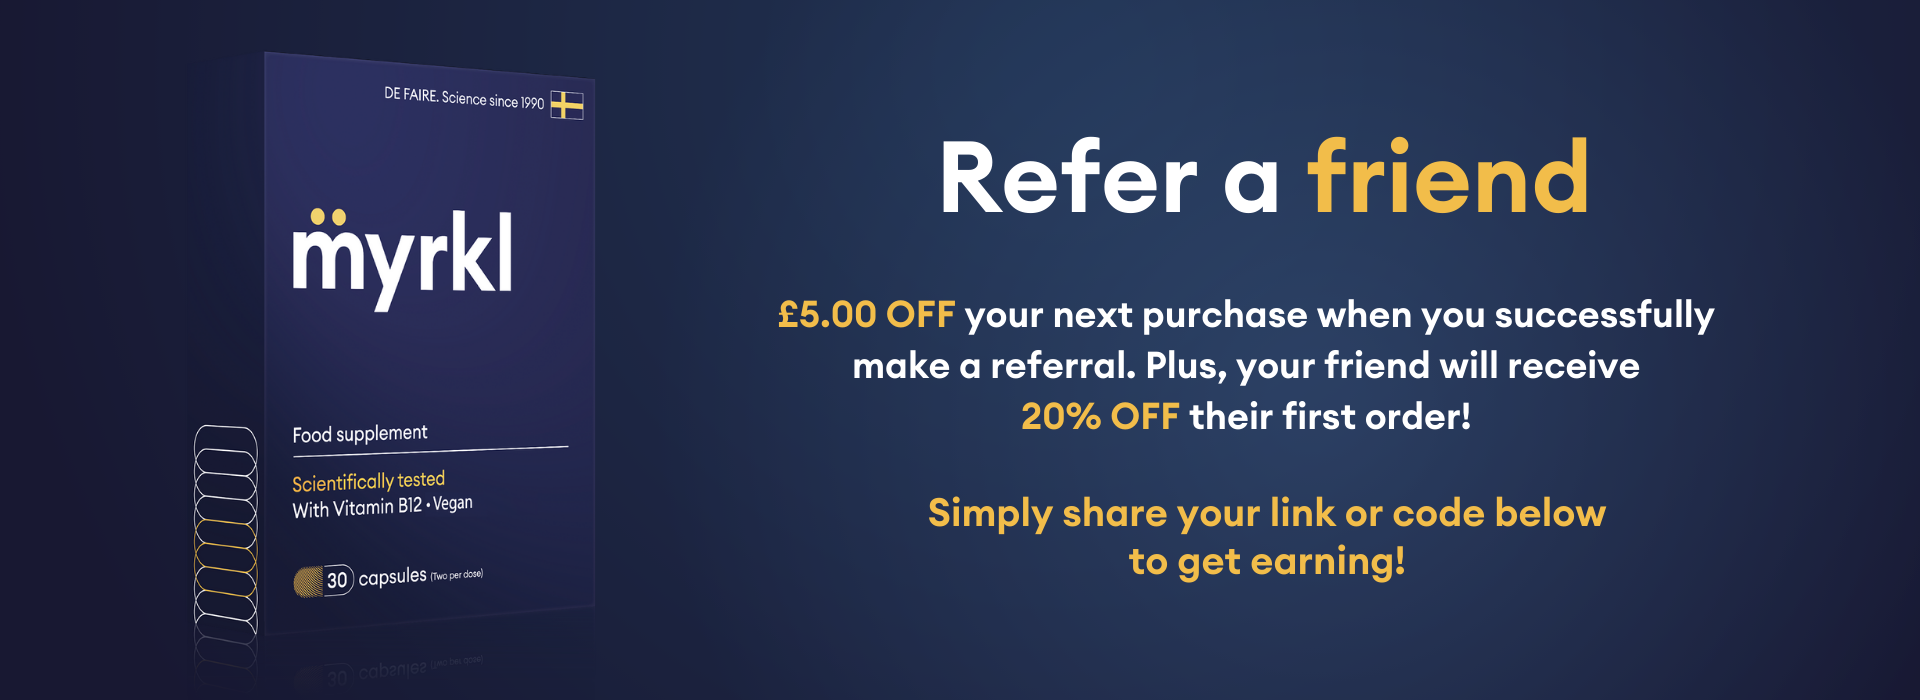 refer a friend. £5 off your next purchase when you successfully make a referral. Plus, your friend will receive 20% off their first order! simply share your link or code below to get earning.